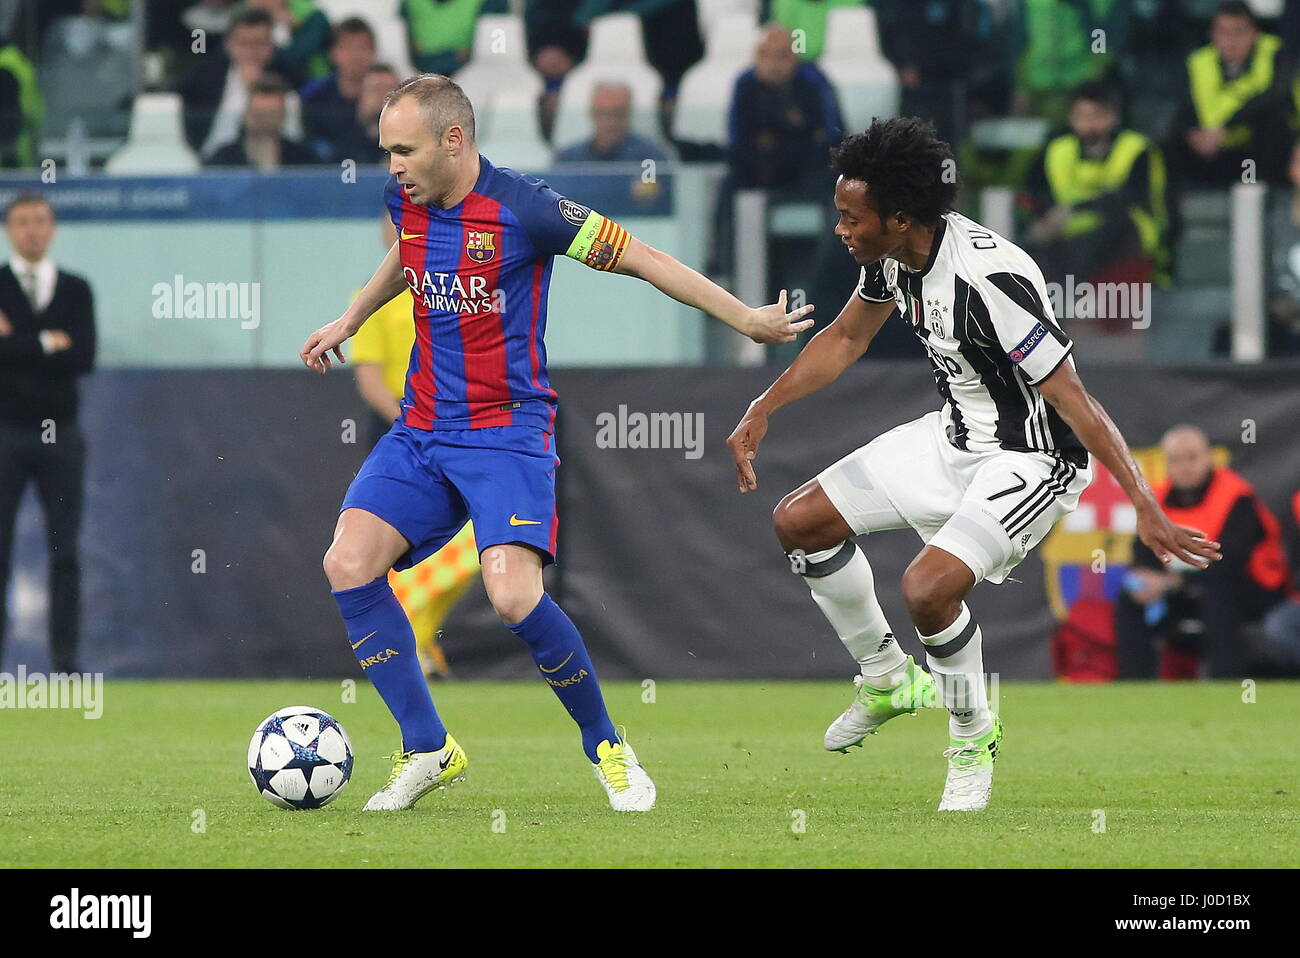 Turin, Italy. 11th Apr, 2017. Andres Iniesta (FCB Barcelona) and Juan Cuadrado (Juventus FC) compete for the ball during the 1st leg of Champions League quarter-final between Juventus FC and FCB Barcelona at Juventus Stadium on April 11, 2017 in Turin, Italy. Juventus won 3-0 over Barcelona. Credit: Massimiliano Ferraro/Alamy Live News Stock Photo